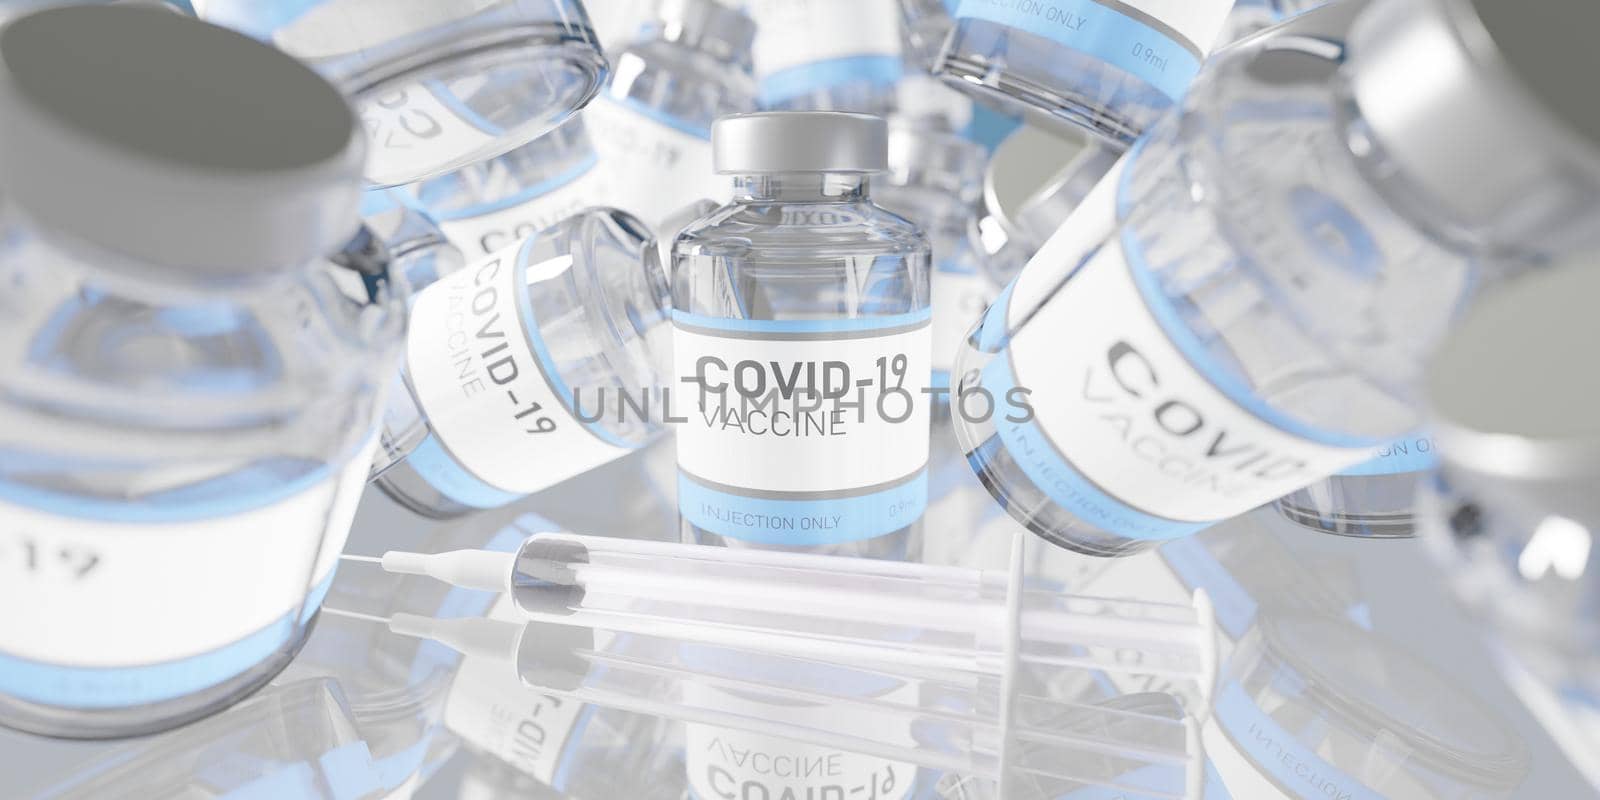 MANY CANS OF CORONAVIRUS VACCINE FALLING ON GLASS TABLE WITH REFLECTIONS AND SYRINGE